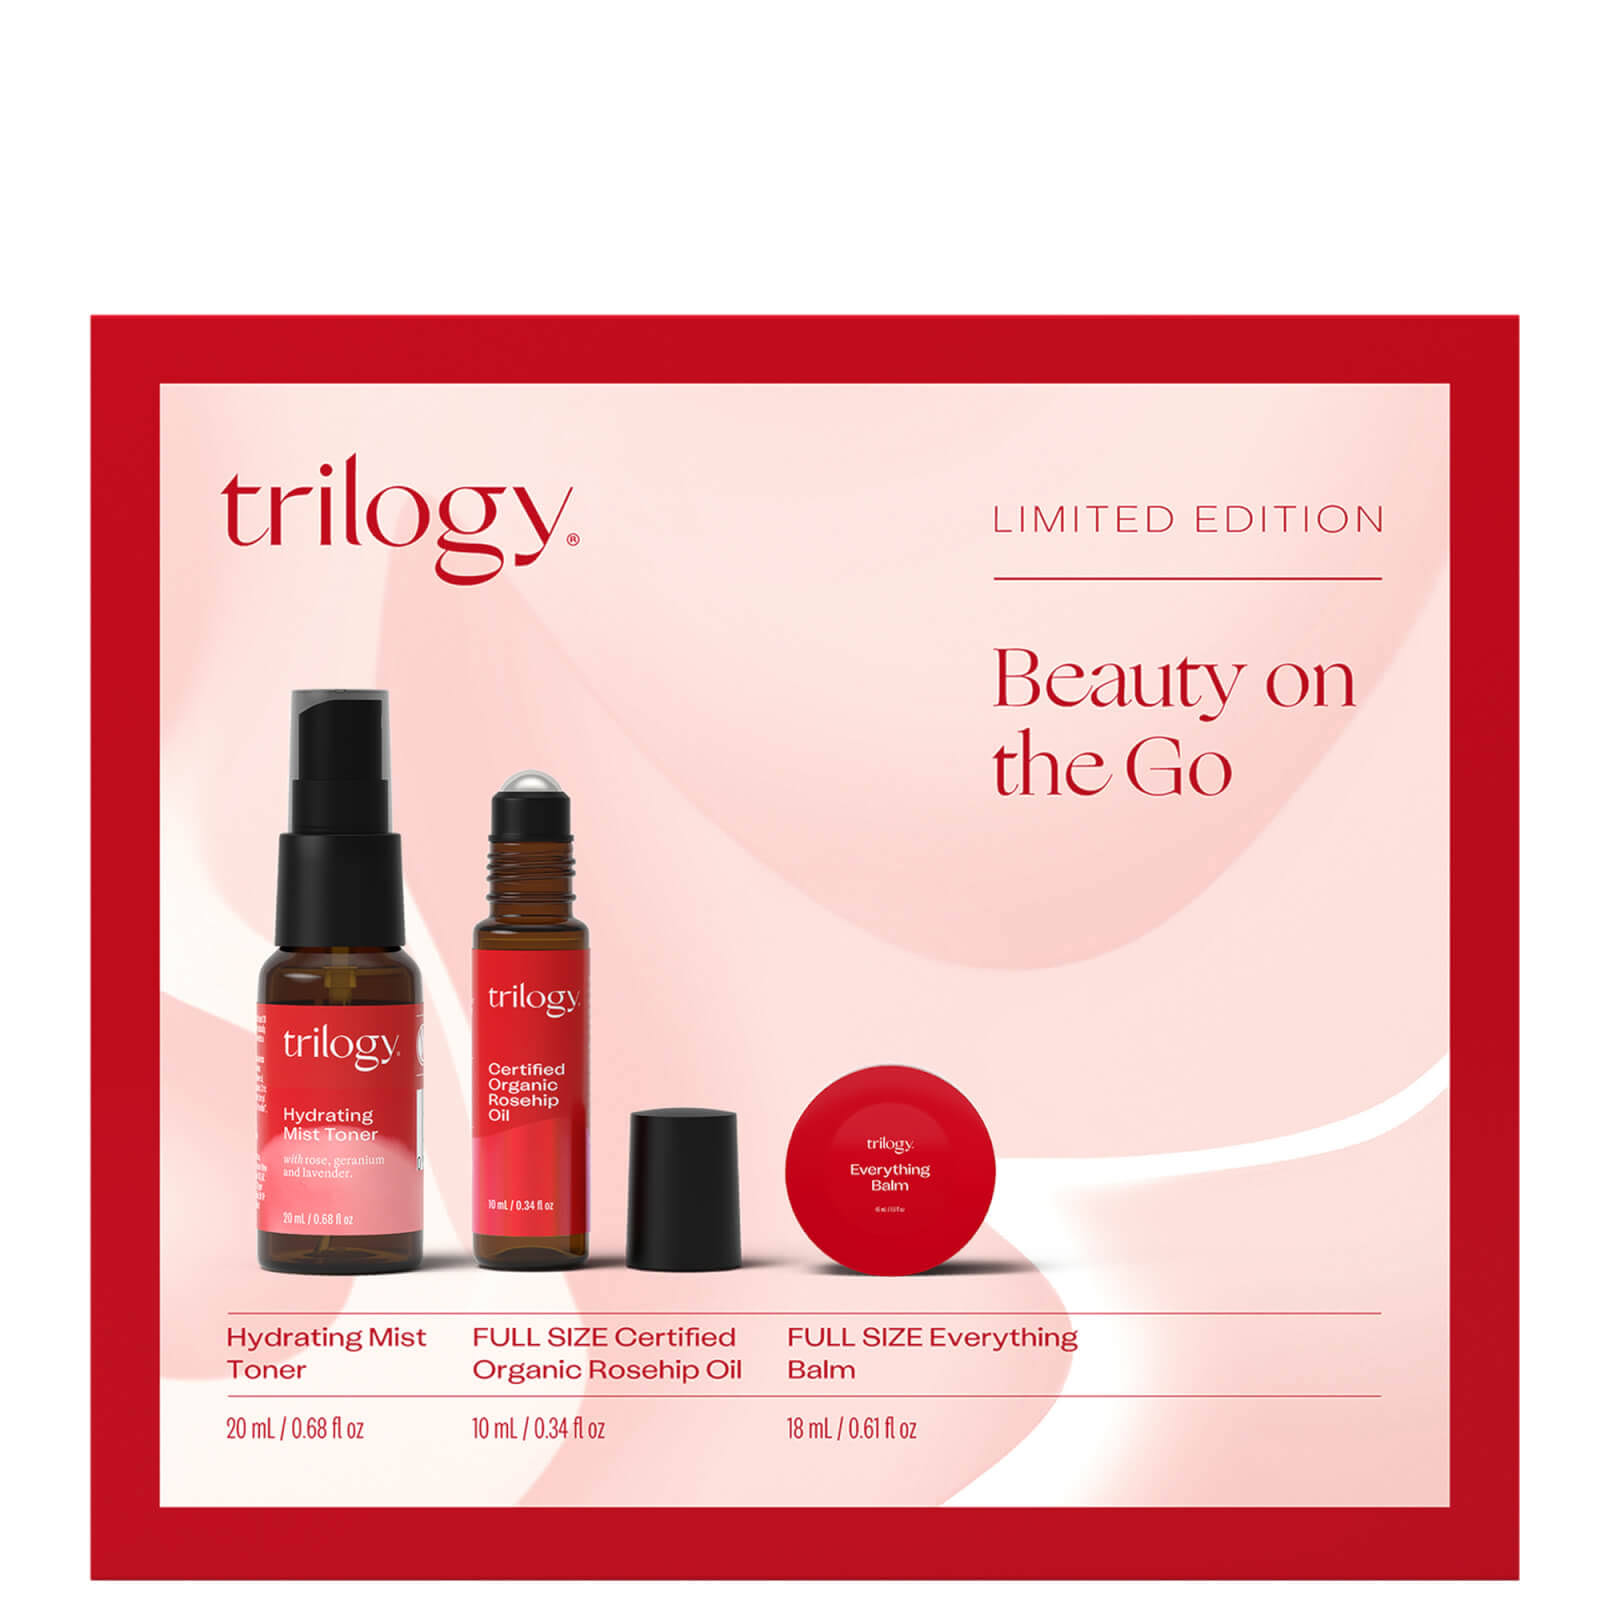 Trilogy Beauty On The Go LIMITED EDITION